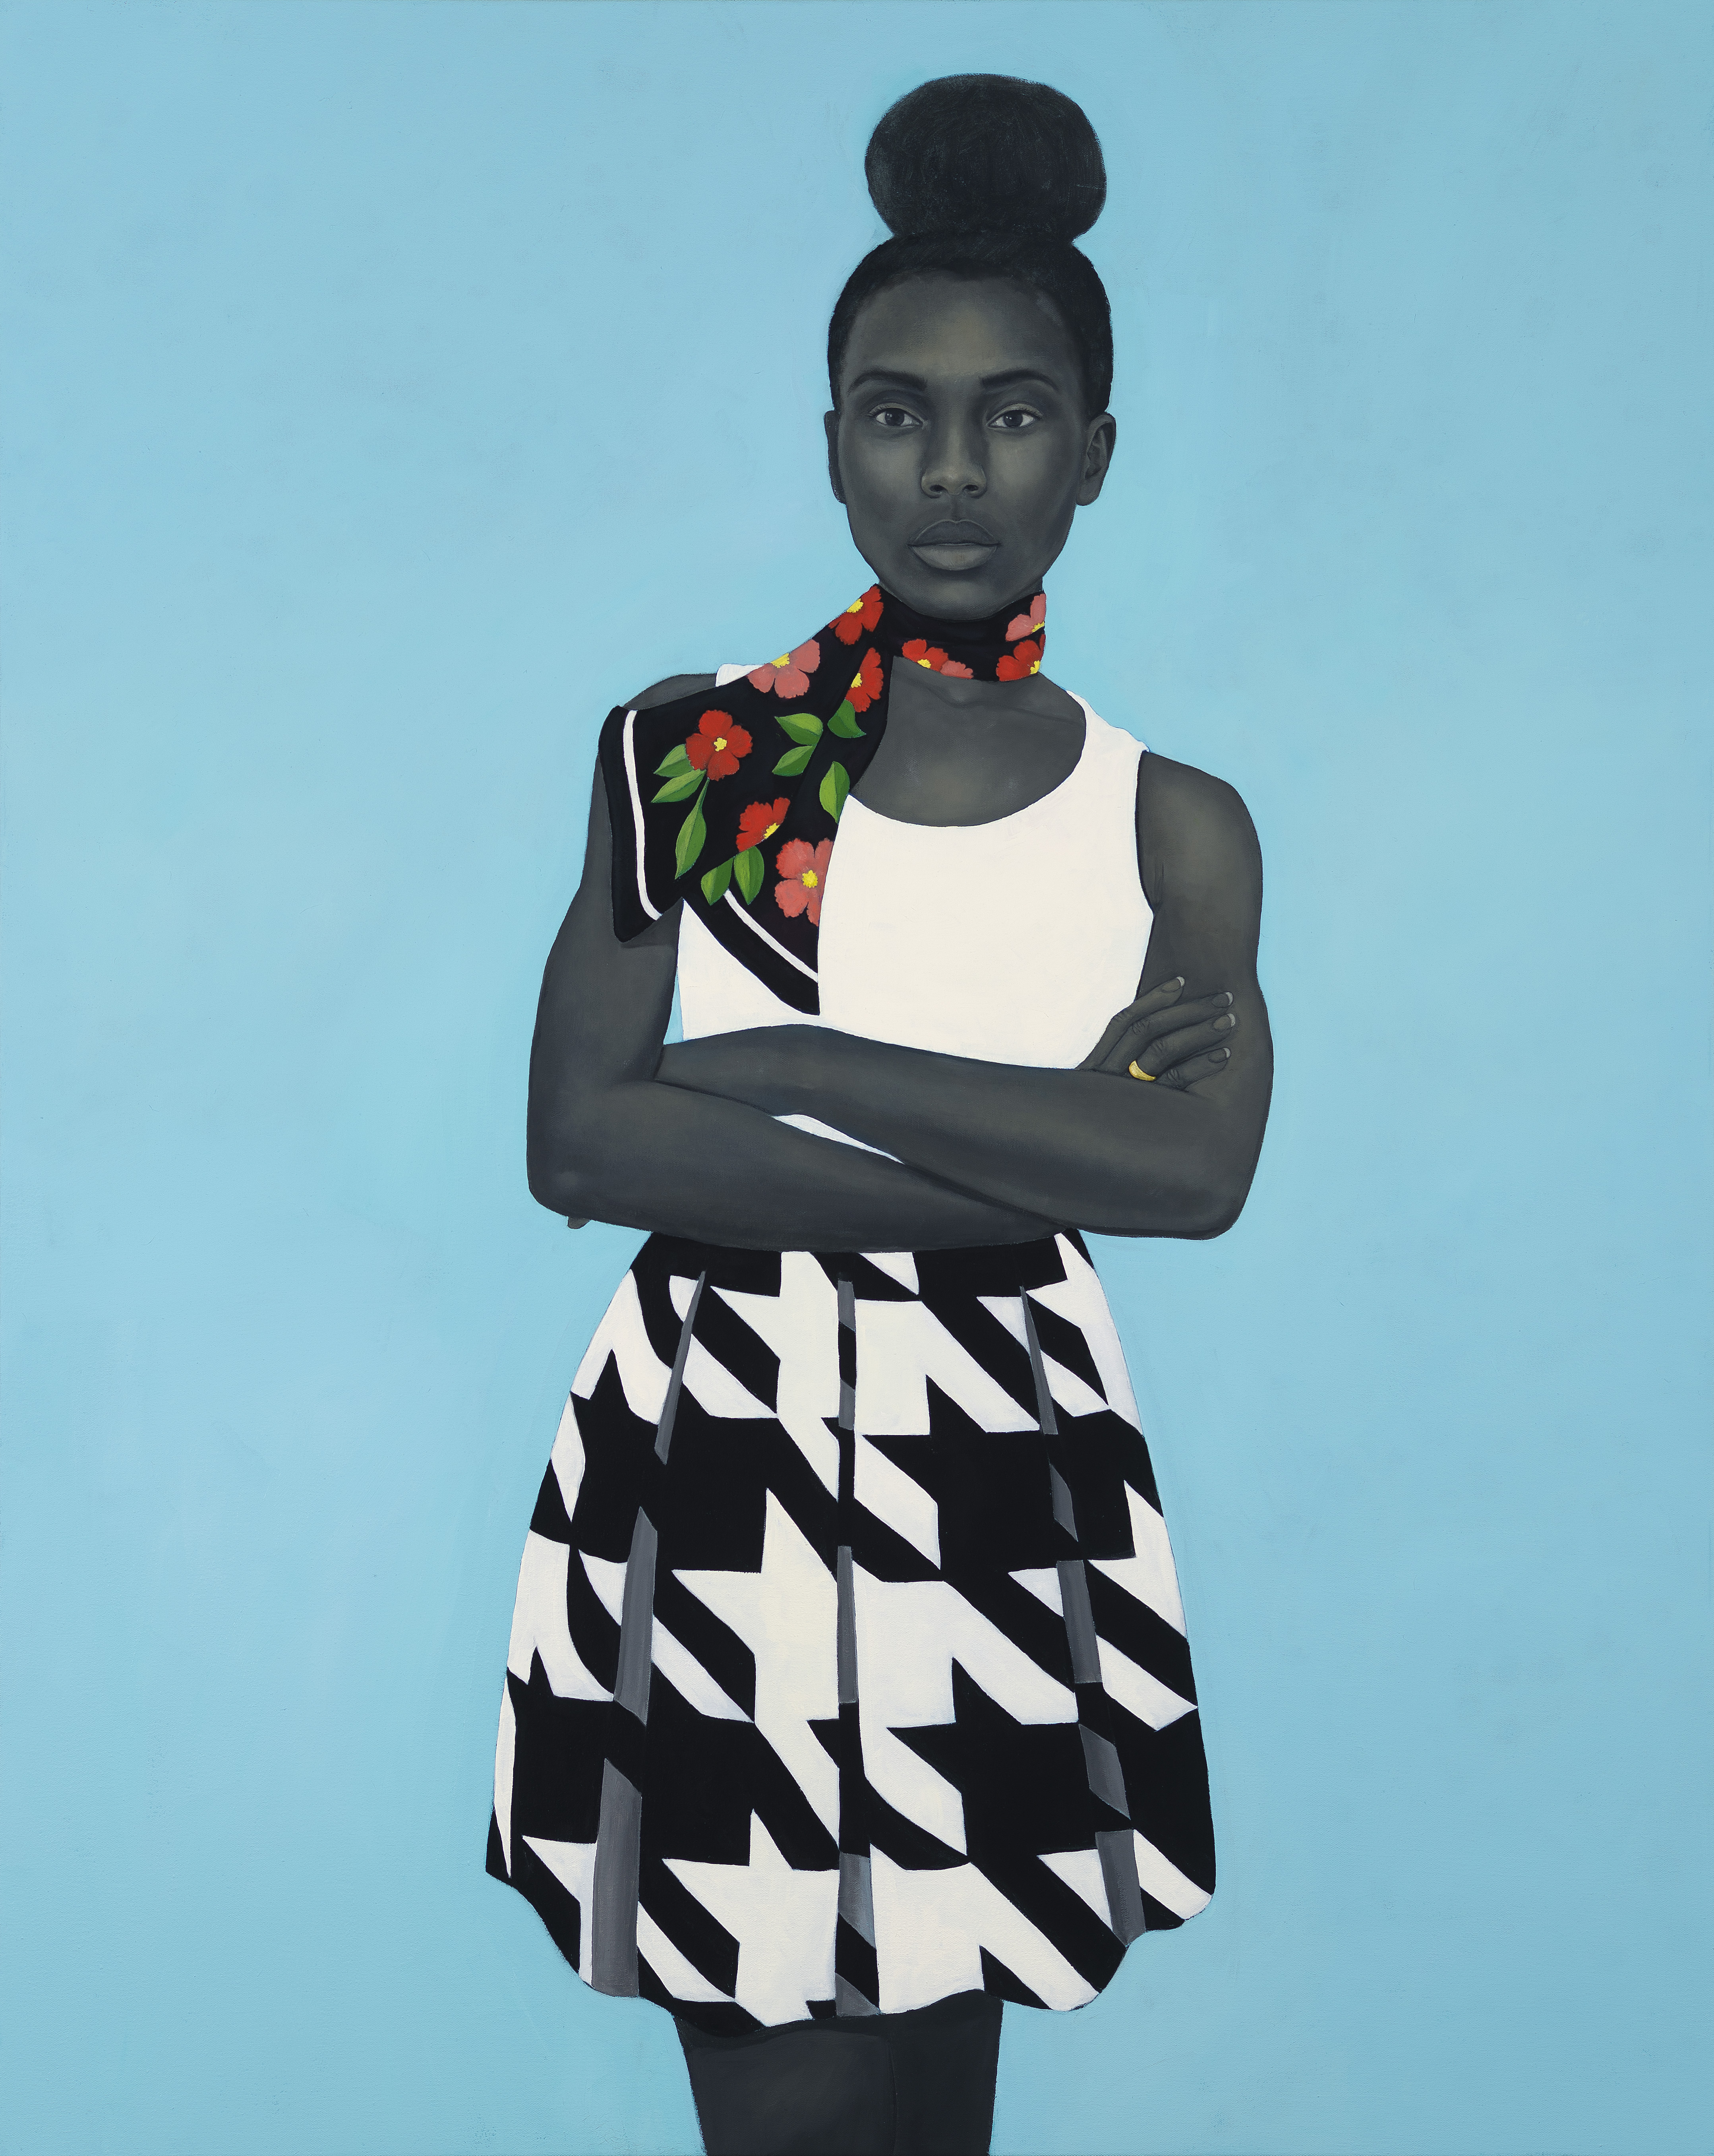 Amy Sherald, A clear unspoken granted magic, 2017. Oil on canvas, 54 × 43 inches. Collection of Denise and Gary Gardner. Courtesy the artist and Monique Meloche Gallery, Chicago